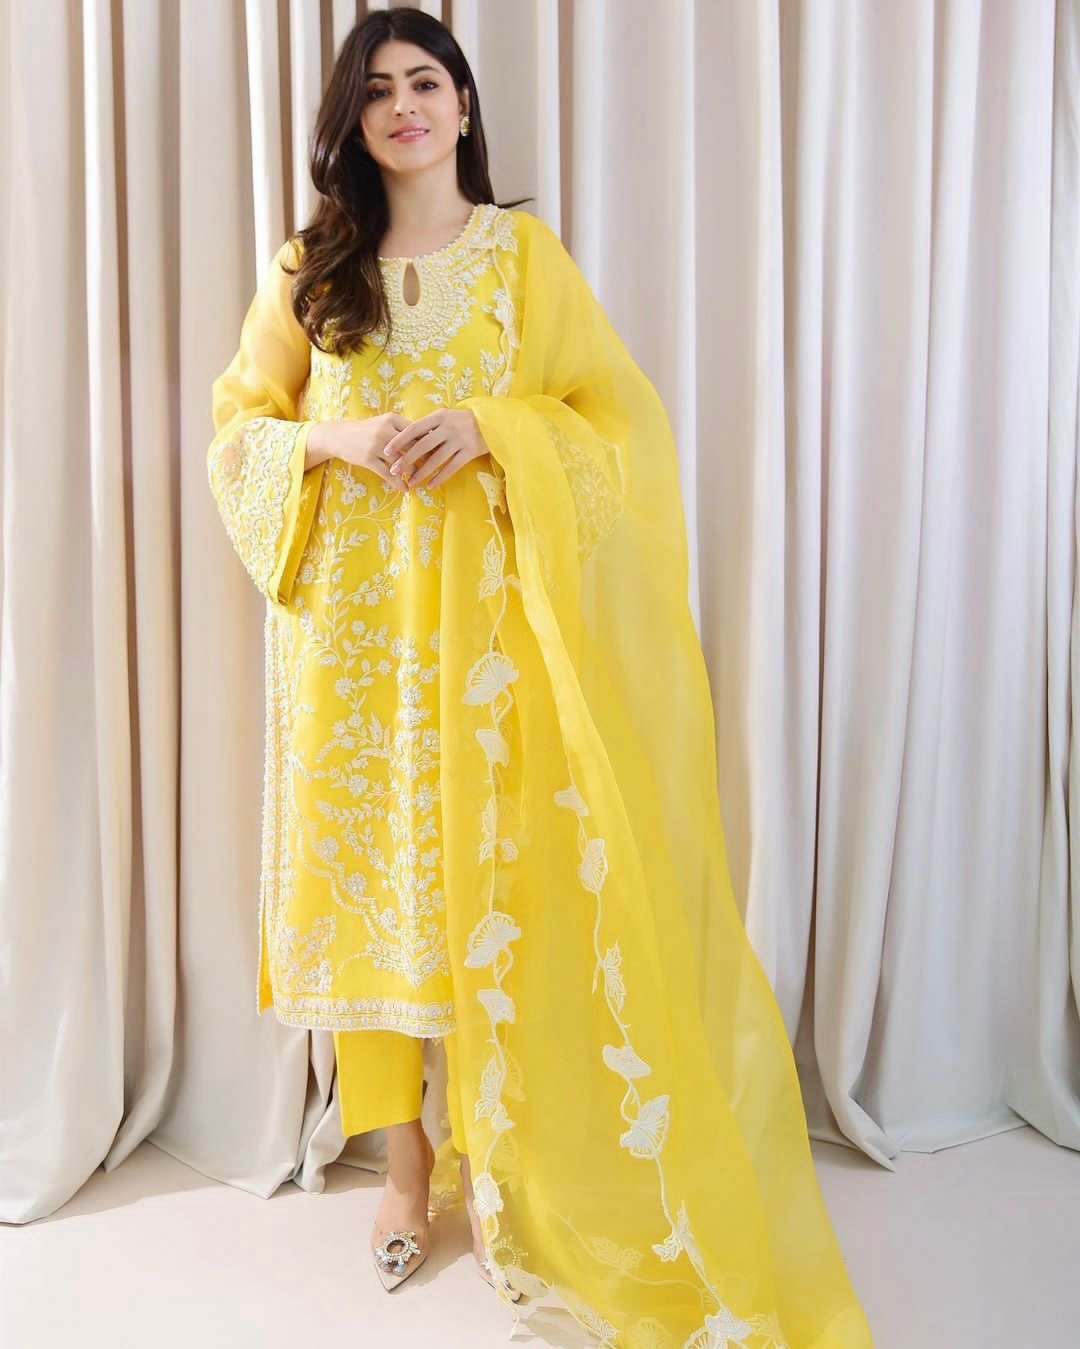 Yellow Outfit for Haldi Ceremony! | Haldi outfits, Haldi dress, Haldi  ceremony outfit